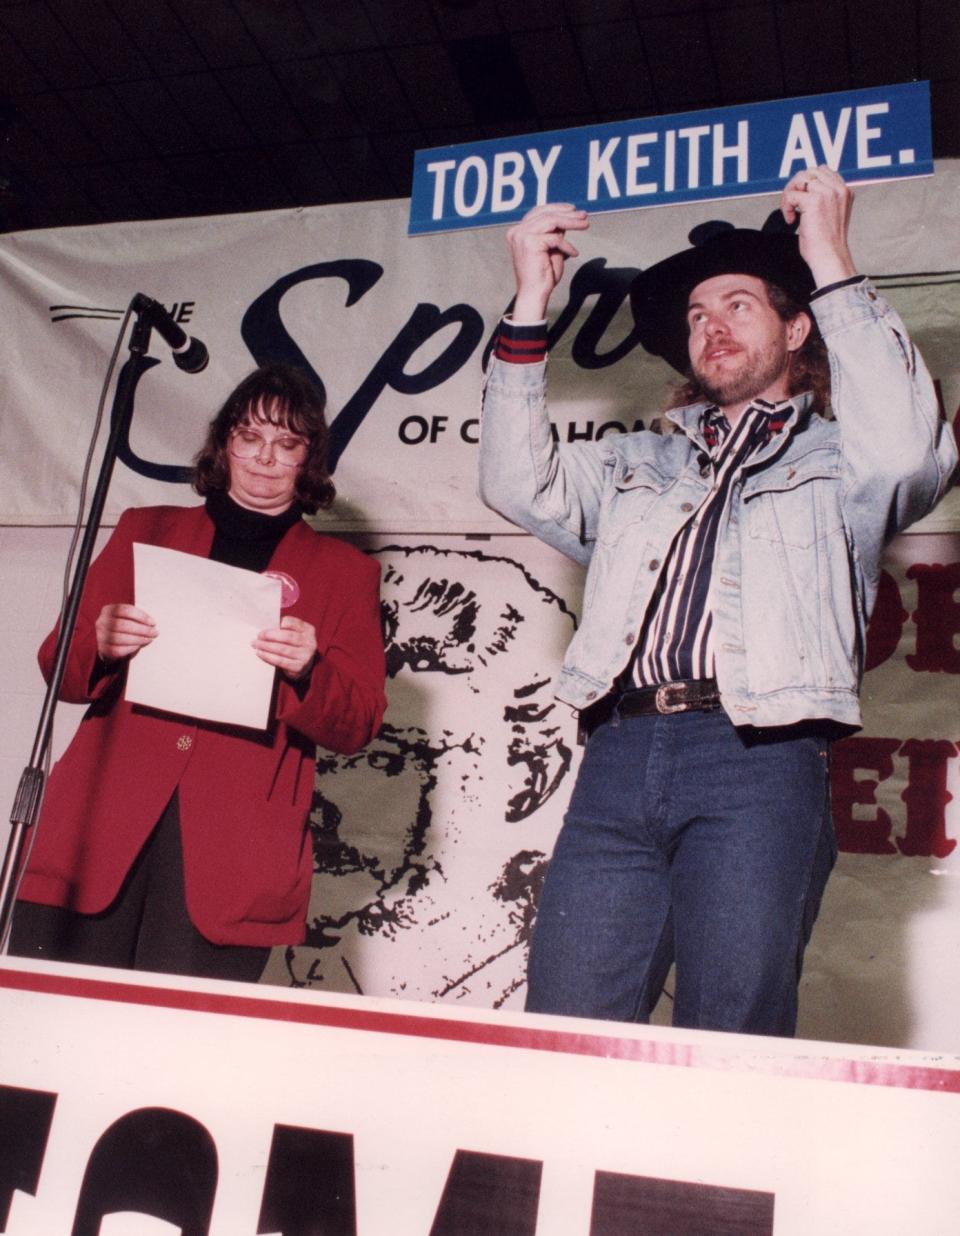 In March 1994, country music singer Toby Keith holds a street sign named in his honor. Moore, Oklahoma, Mayor Debe Homer had presented Keith the sign during a ceremony at Moore High School.